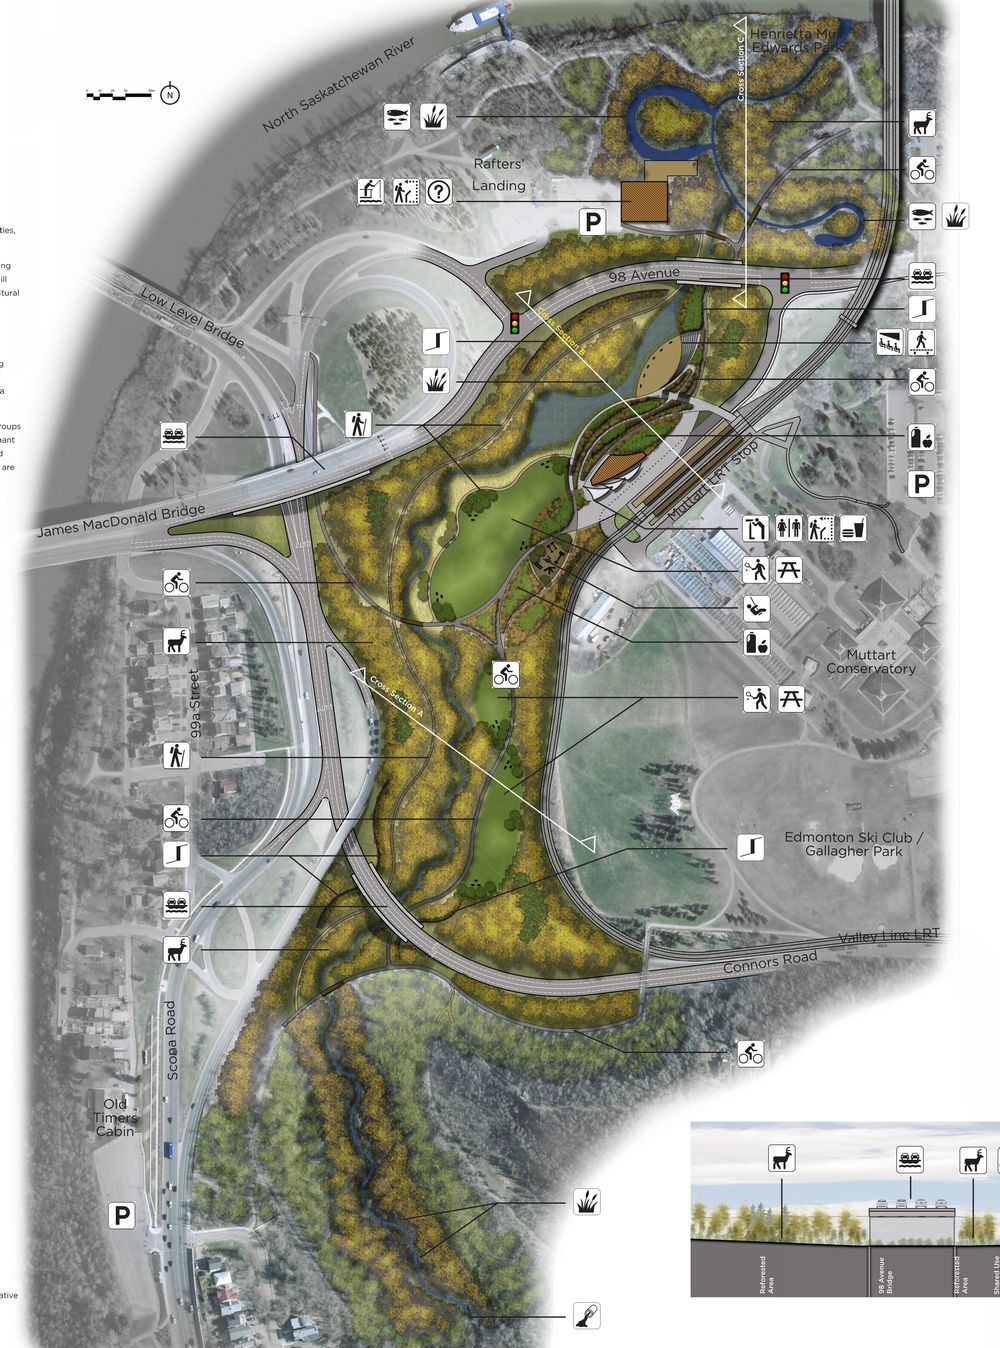 Three concept designs are now posted at edmonton.ca/millcreekstudy. This one would treat the upper reach of the project area as a district park with a cafe, playground, canoeing pond and picnic area near the future LRT stop. The lower reach is natural wetland.